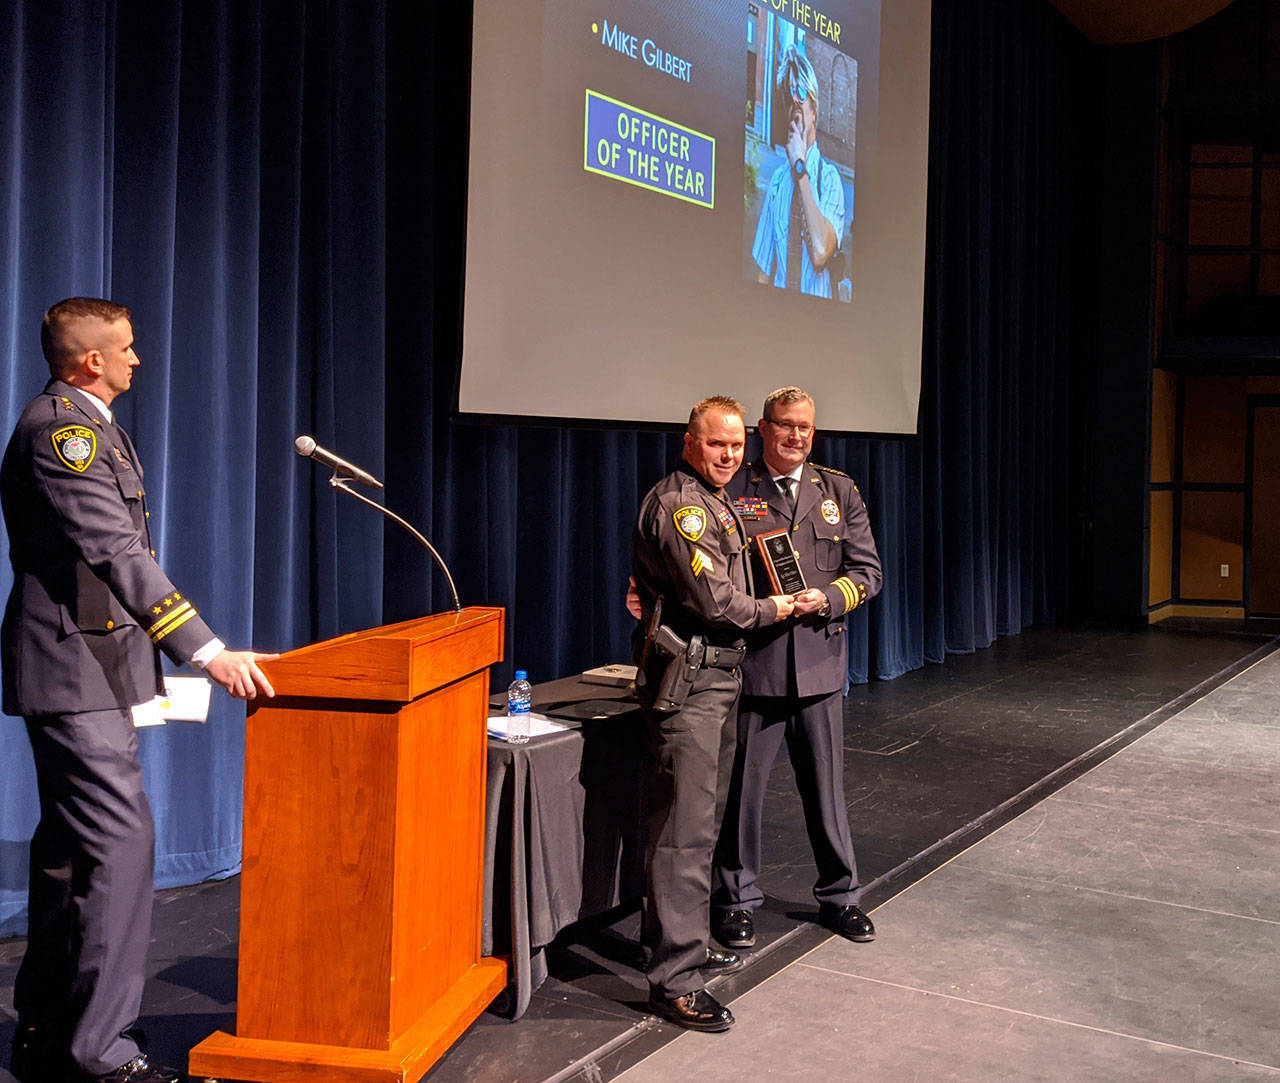 Arlington Police Chief Jonathan Ventura presents Sgt. Mike Gilbert with the Office of the Year Award at a ceremony Jan. 24 in the Byrnes Performing Arts Center. It was one of awards bestowed on officers, support staff and volunteers.